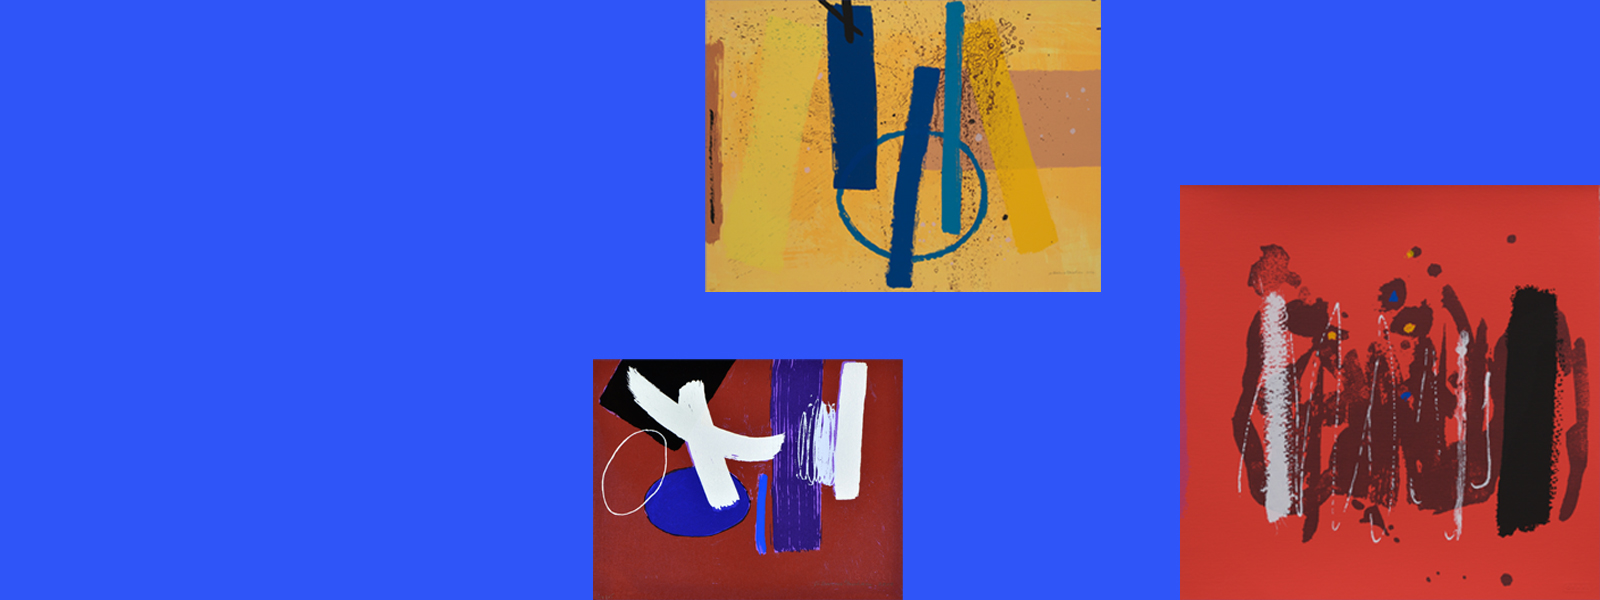 Three screenprints grouped on a blue background. From left to right: a screenprint with brown background, blue oval, black black, white oval outline, white crossed brushstrokes and blue and white vertical brushstrokes; a screenprint with yellow background, vertical brushstrokes in yellows and blues and blue circle outline; a screenprint with orange background wide brown scribbles and vertical white and black brushstrokes.